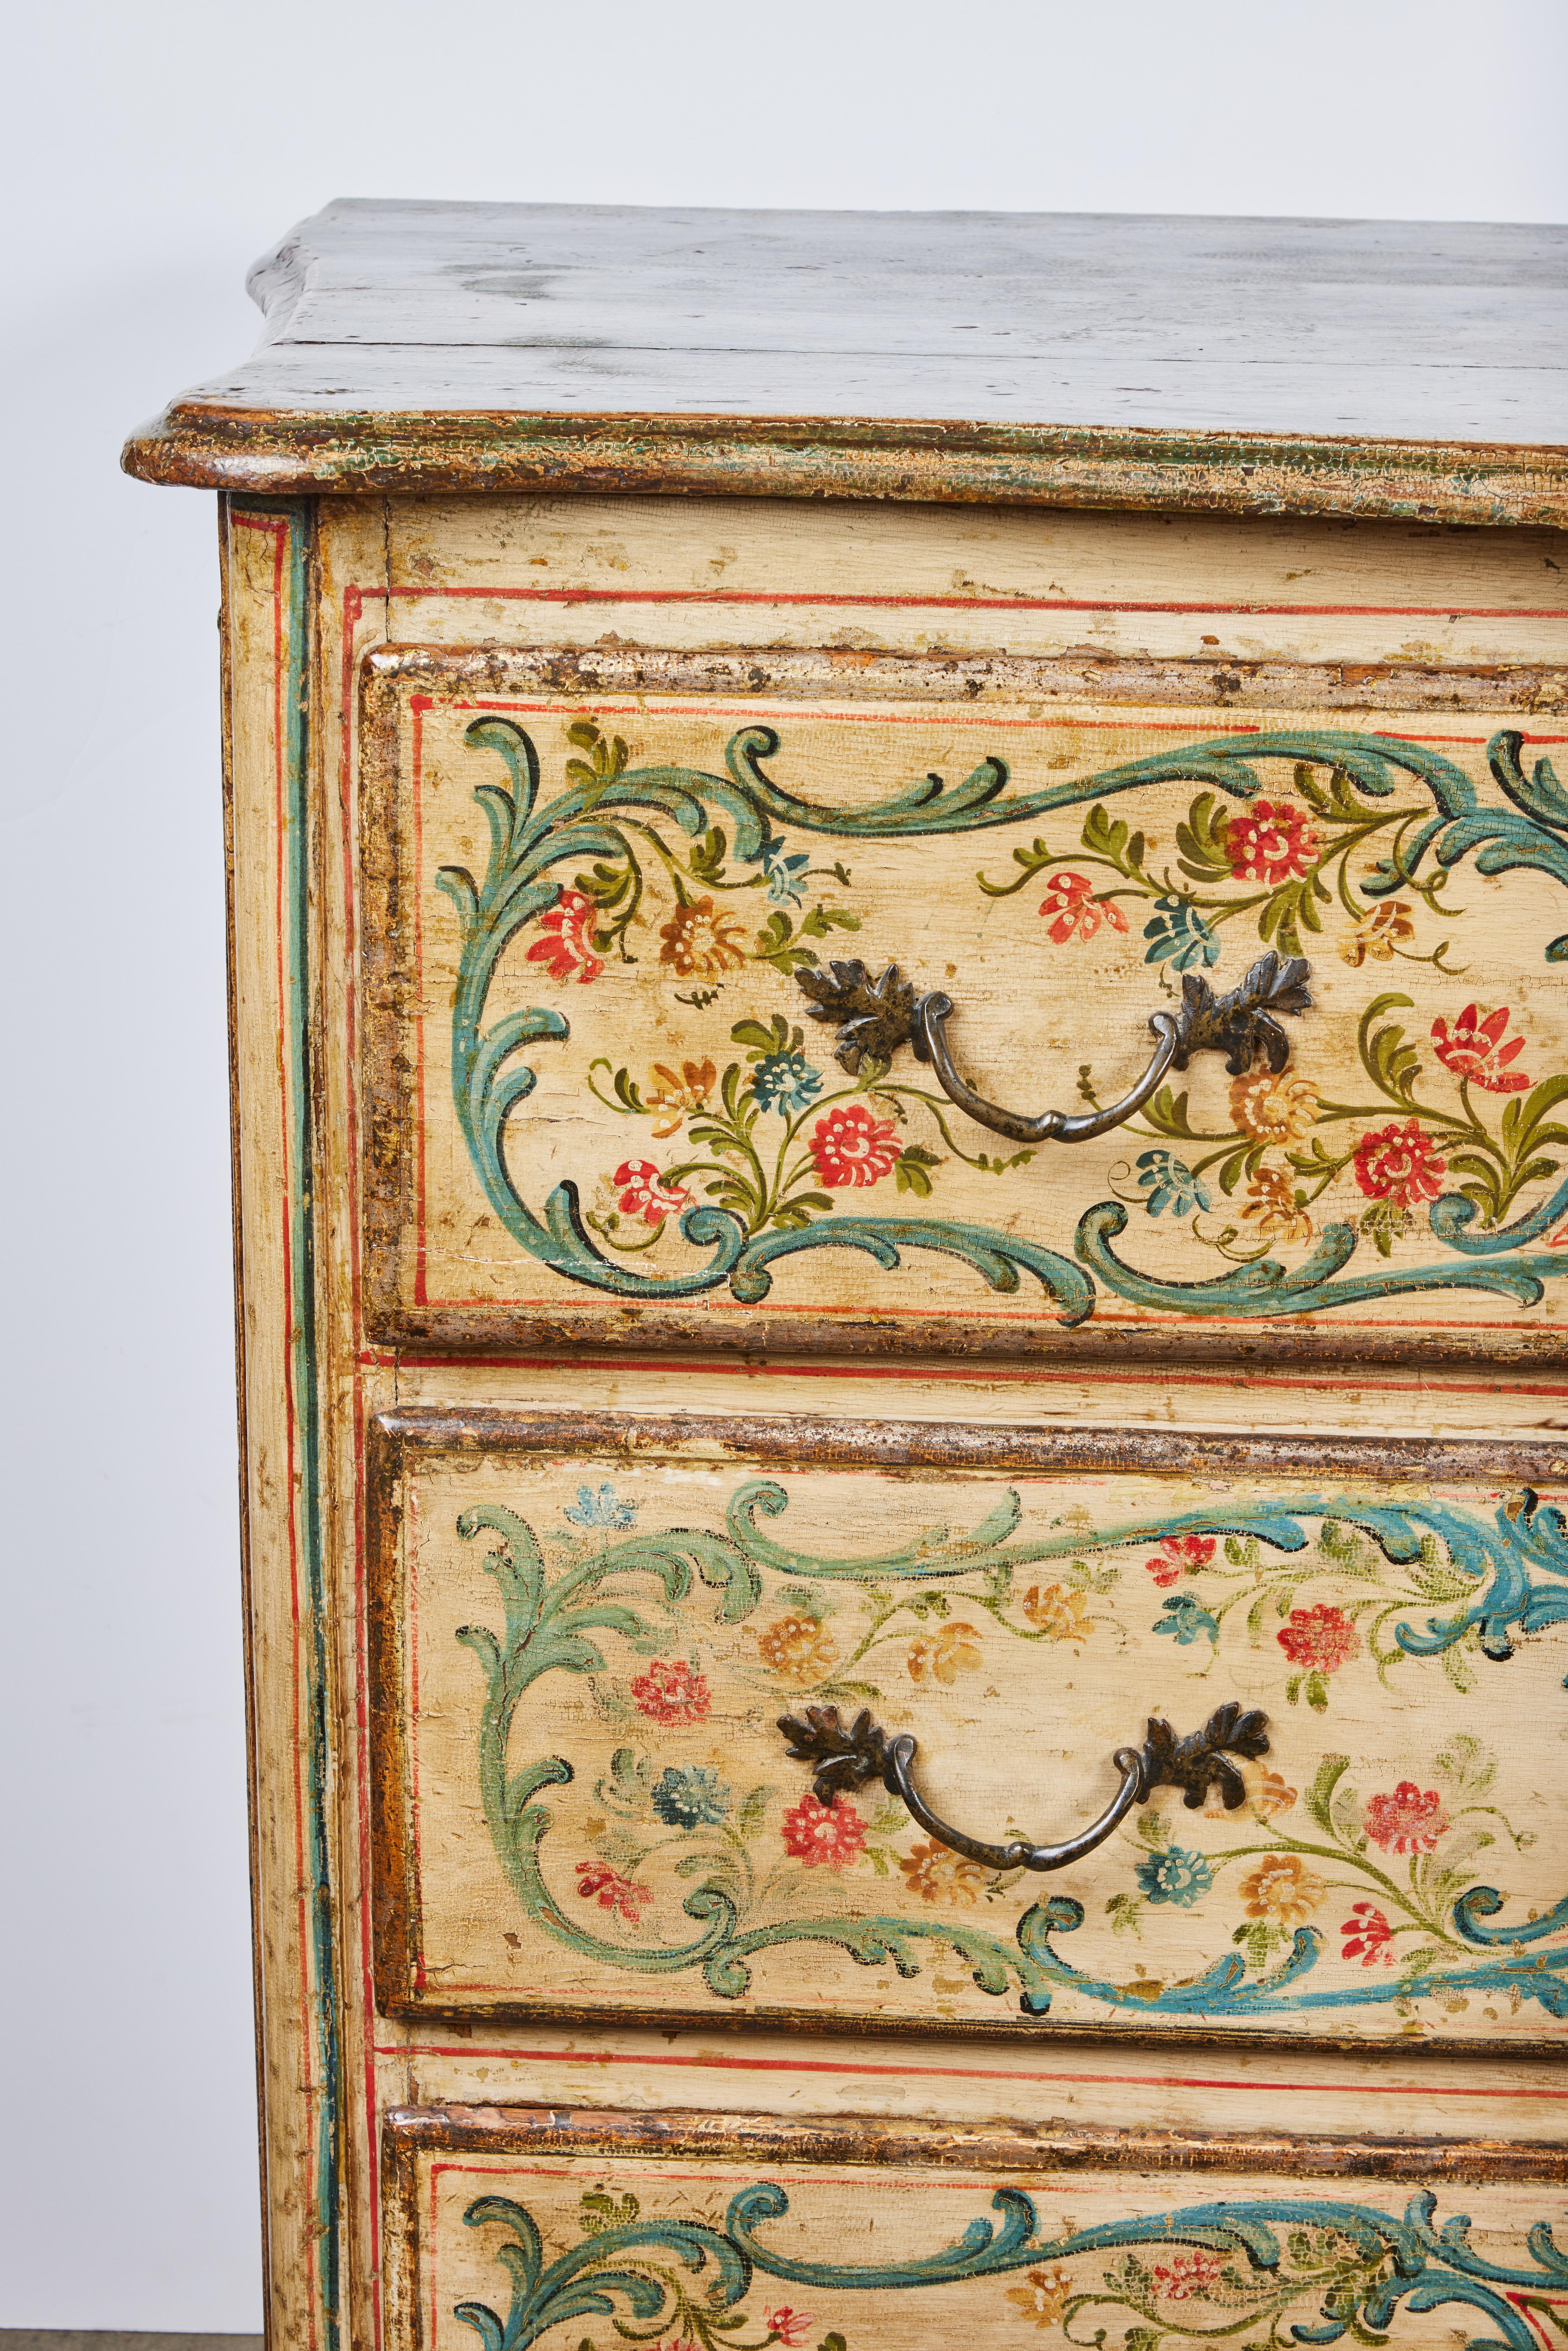 A carved and hand painted Venetian commode decorated with delicate flowers, leaves and scrolls. The inset sides fully decorated as well. 3 drawers are outlined with gilding. Faux marble painted top. Bronze hardware.  Drawers are fabric lined with